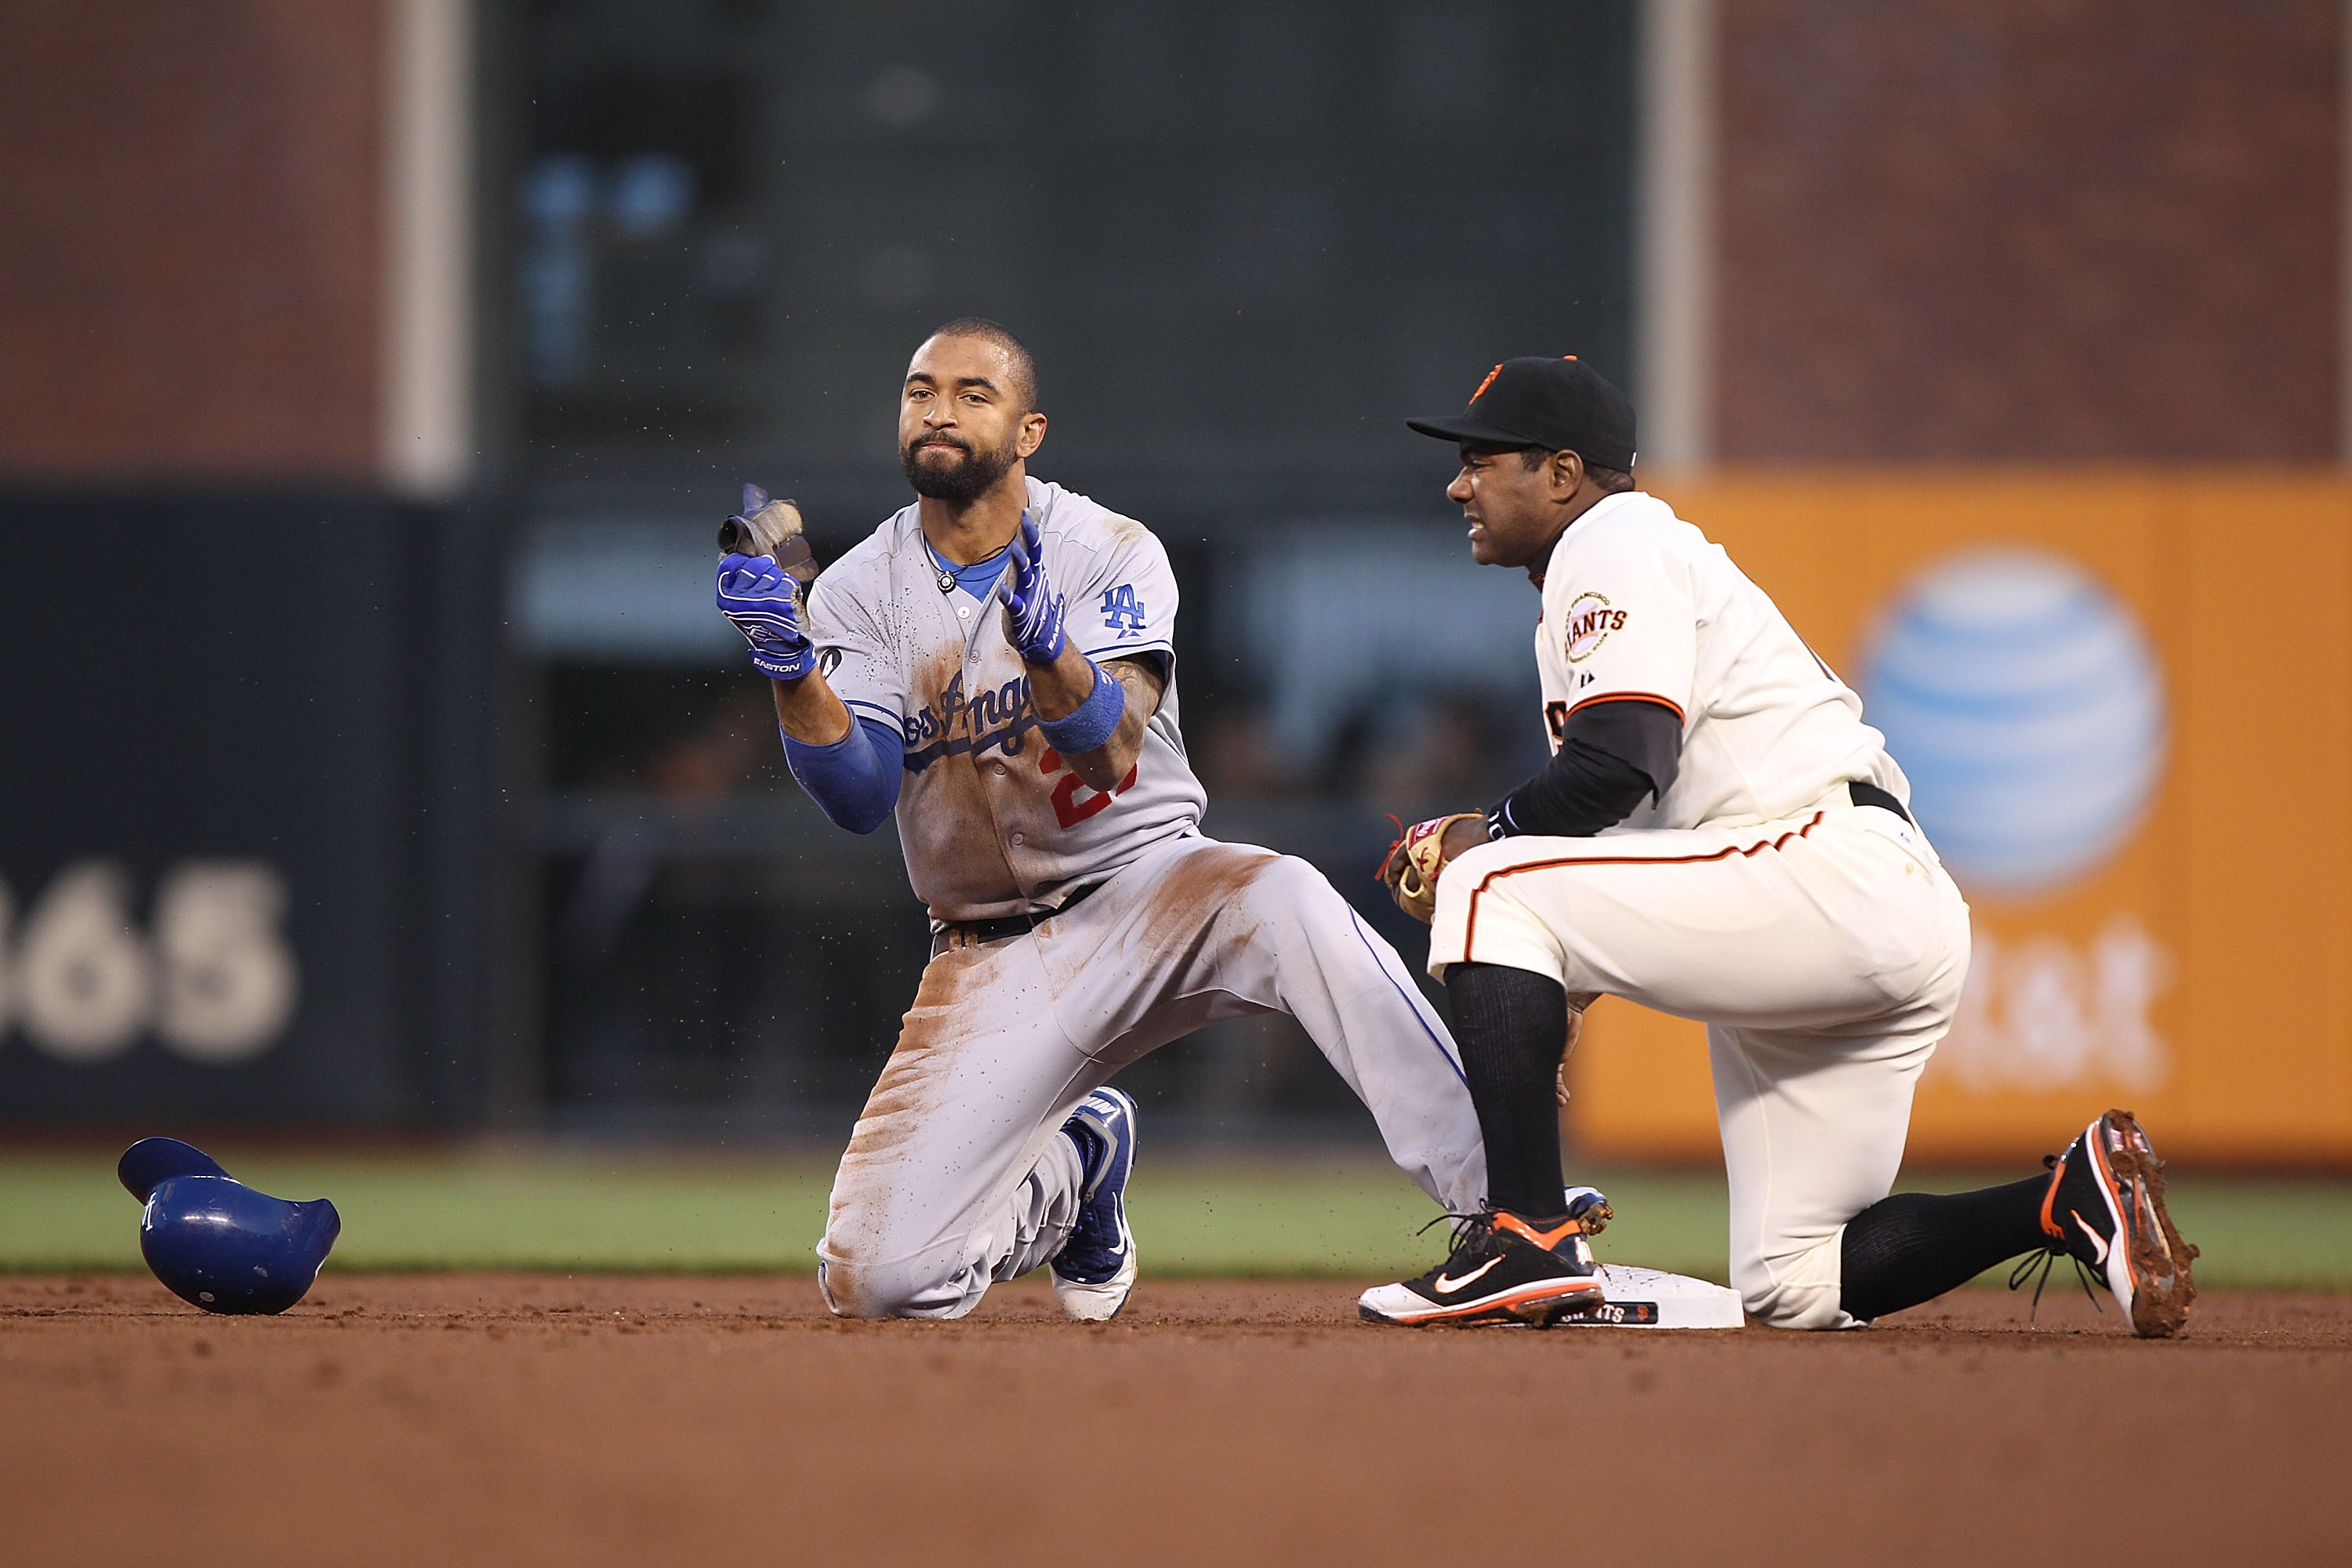 SAN FRANCISCO, CA - APRIL 11:  Matt Kemp #27 of the Los Angeles Dodgers celebrates after stealing second base past Miguel Tejada #10 of the San Francisco Giants in the second inning during an MLB game at AT&T Park on April 11, 2011 in San Francisco, Calif